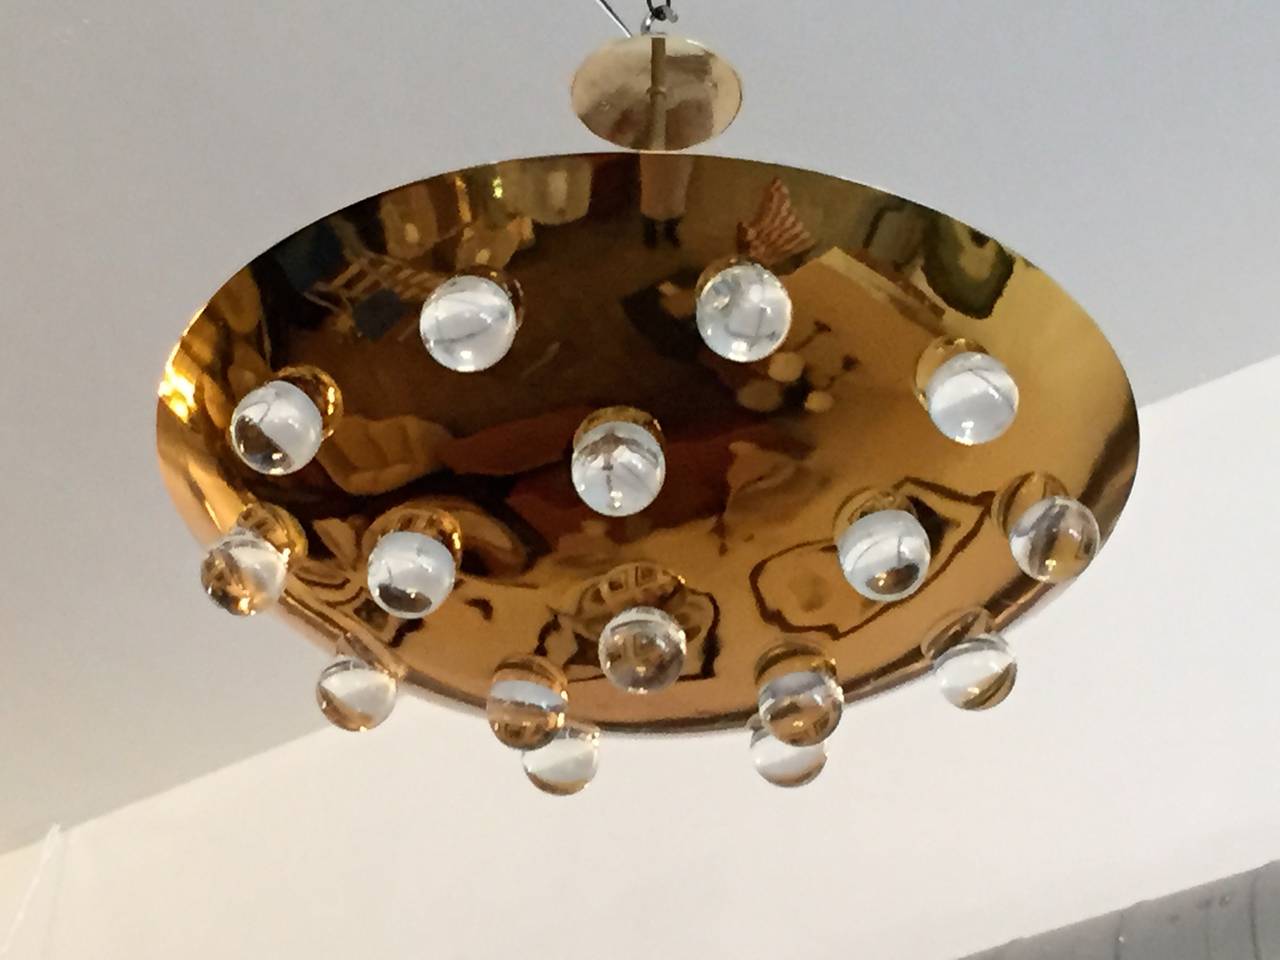 A wonderful 1960s French gold-plated brass round disc fixture with 16 solid glass orbs. Five-light sources which emit light downward through the glass as well as up toward the ceiling. The ceiling pole can be lengthened or shortened. Rewired and